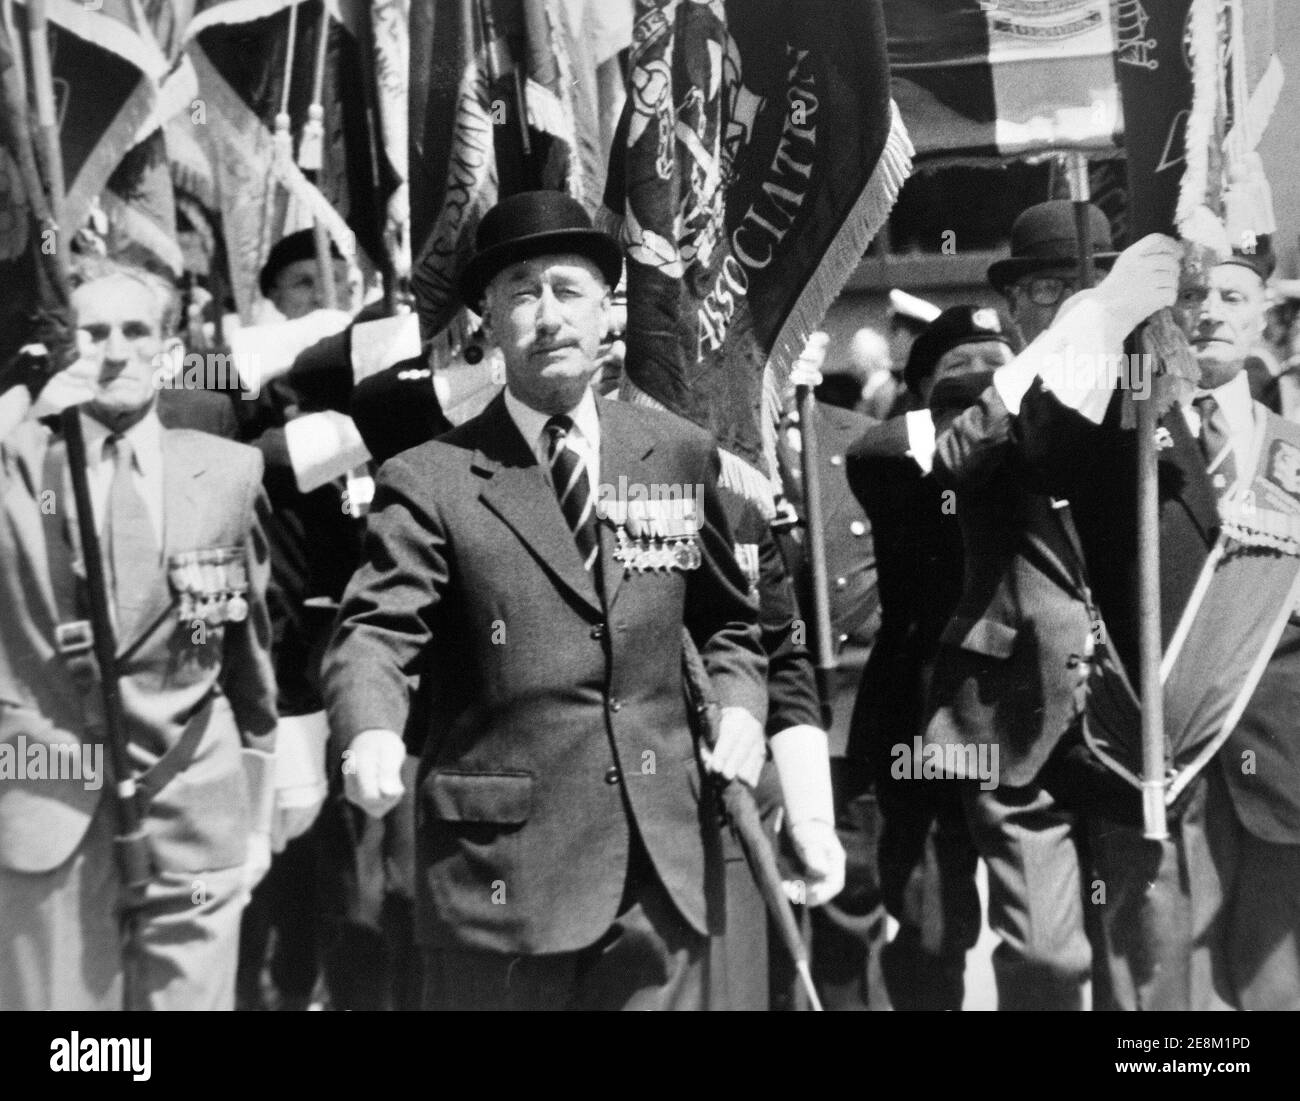 D.DAY VETERANS MARCH THROUGH PORTSMOUTH ON TJHE 40TH ANNIVERSARY OF D.DAY AND THE NORMANDY LANDINGS 1984 Stock Photo